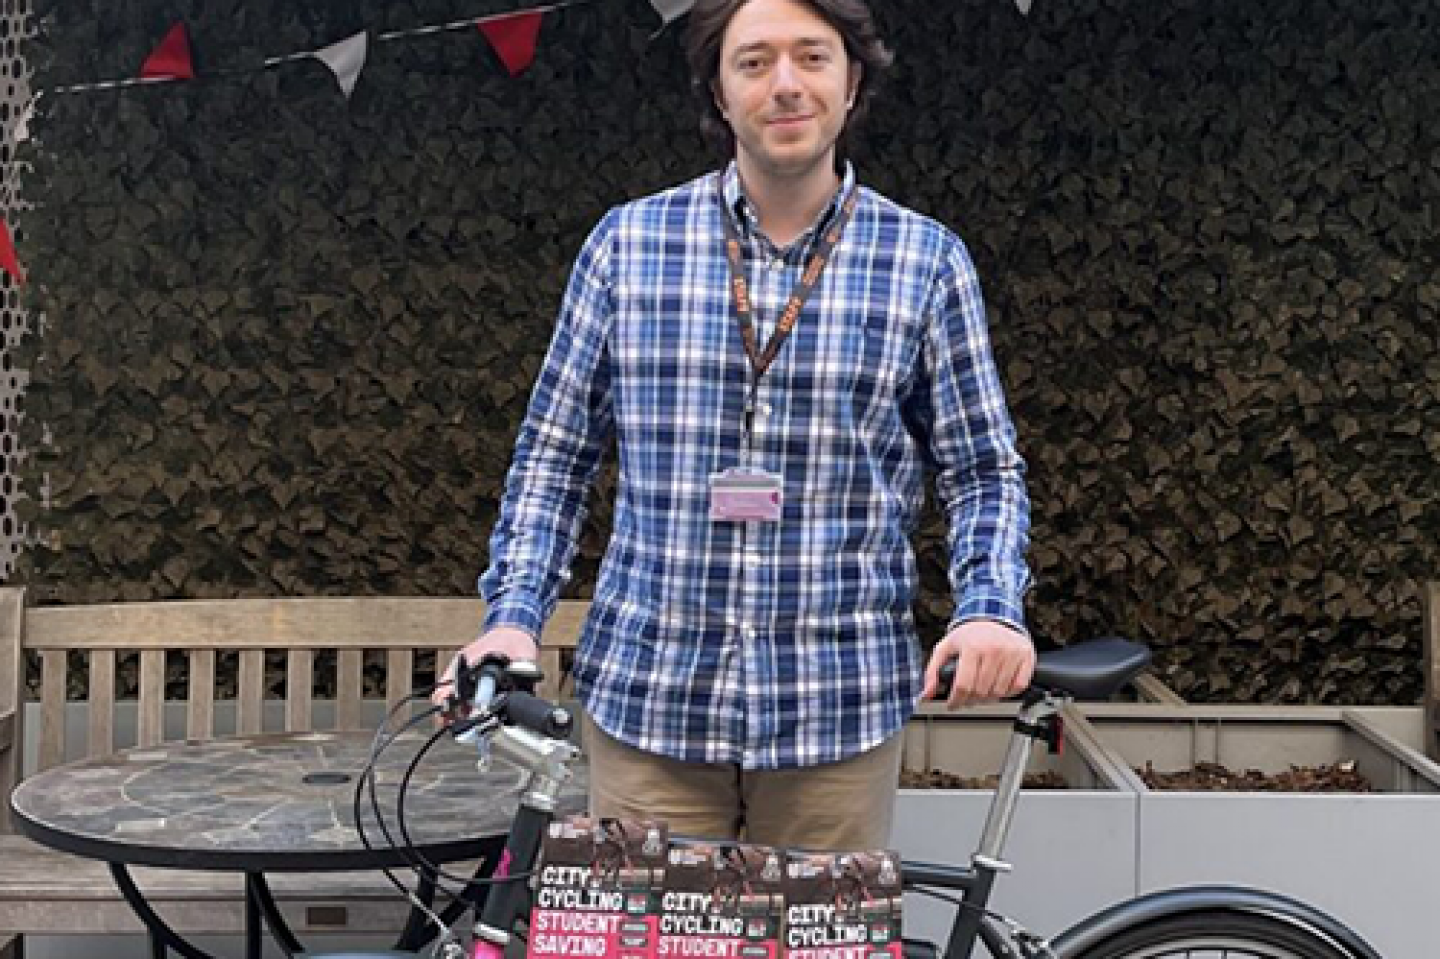 Yavuz Kafadar, Deputy President of City Student's Union, stands outside with a bike. He is wearing a blue shirt and beige trousers. There is colourful bunting in the background.